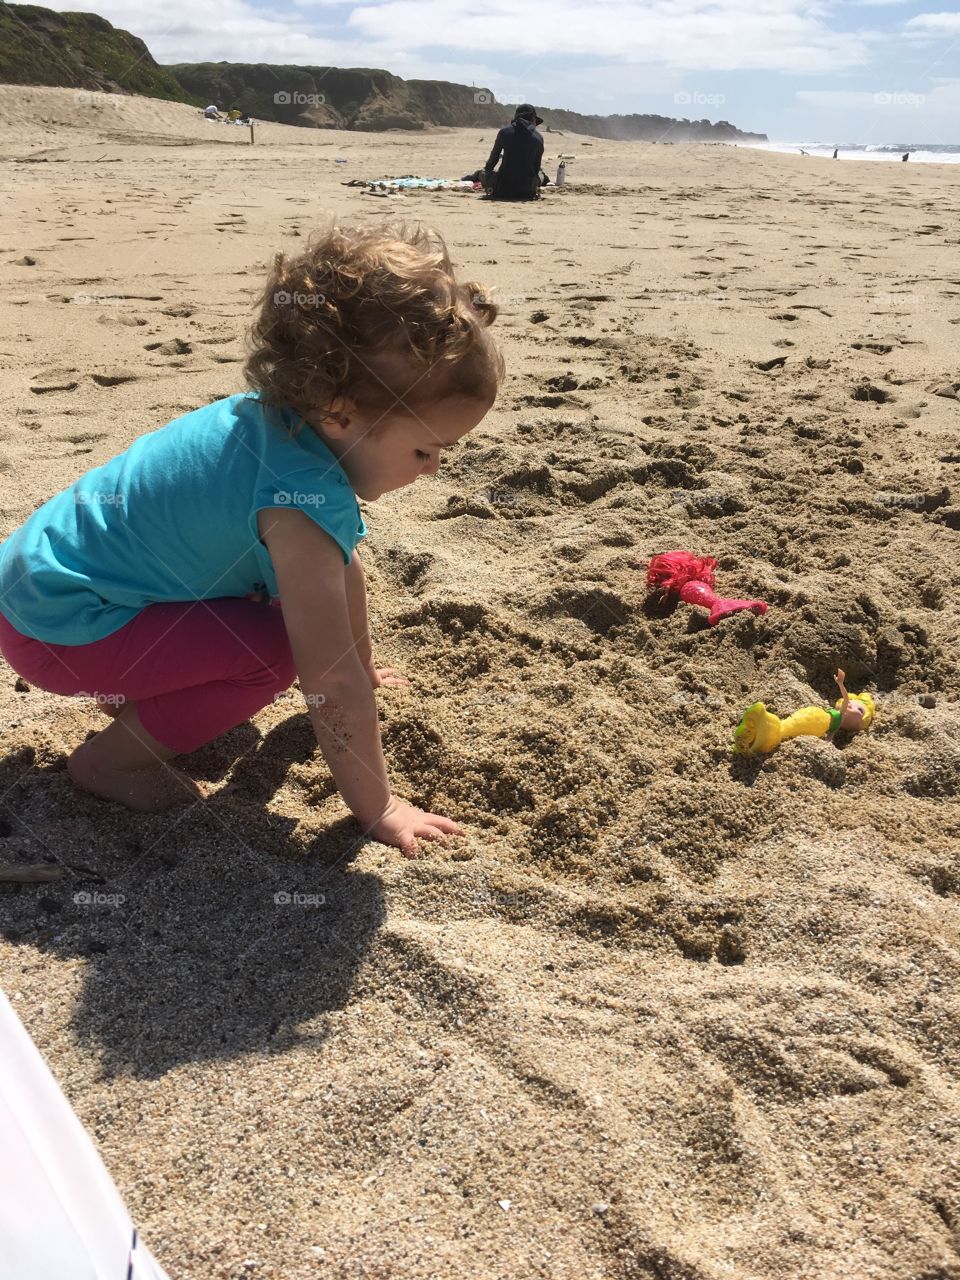 Playing in the sand.